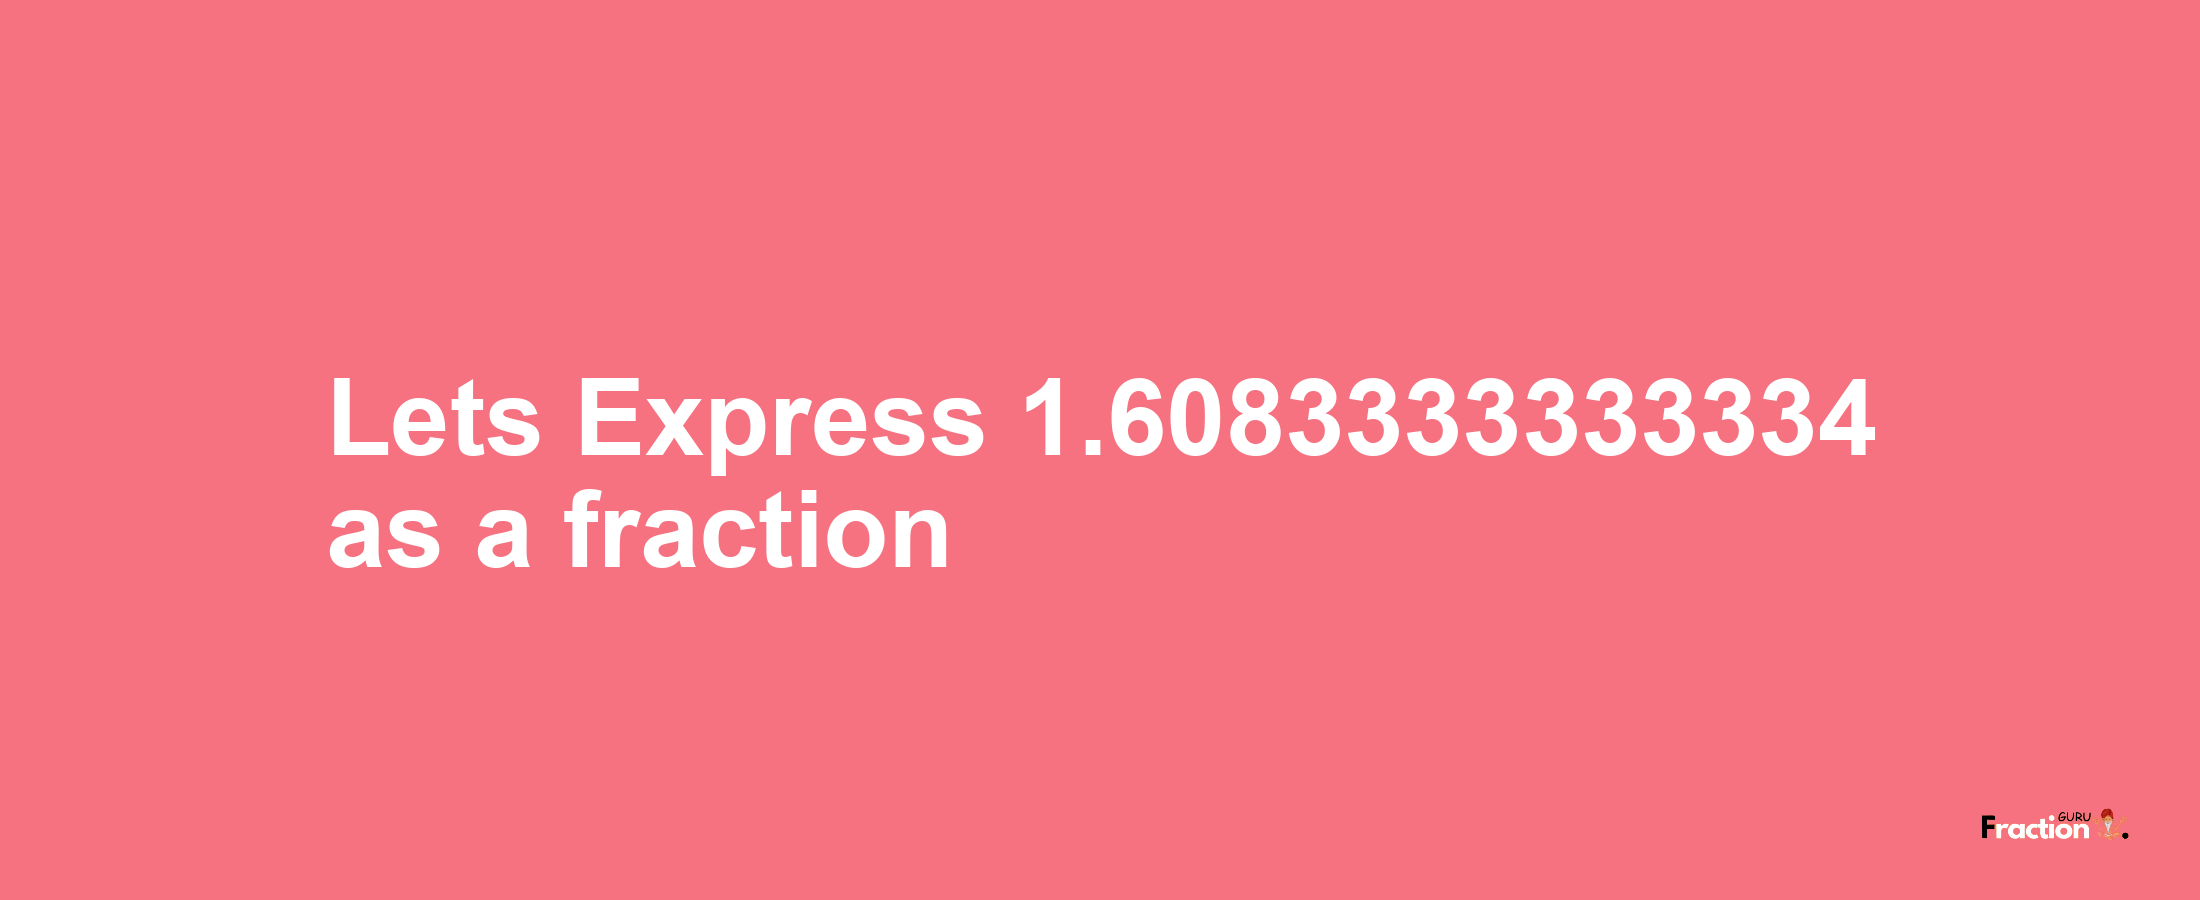 Lets Express 1.6083333333334 as afraction